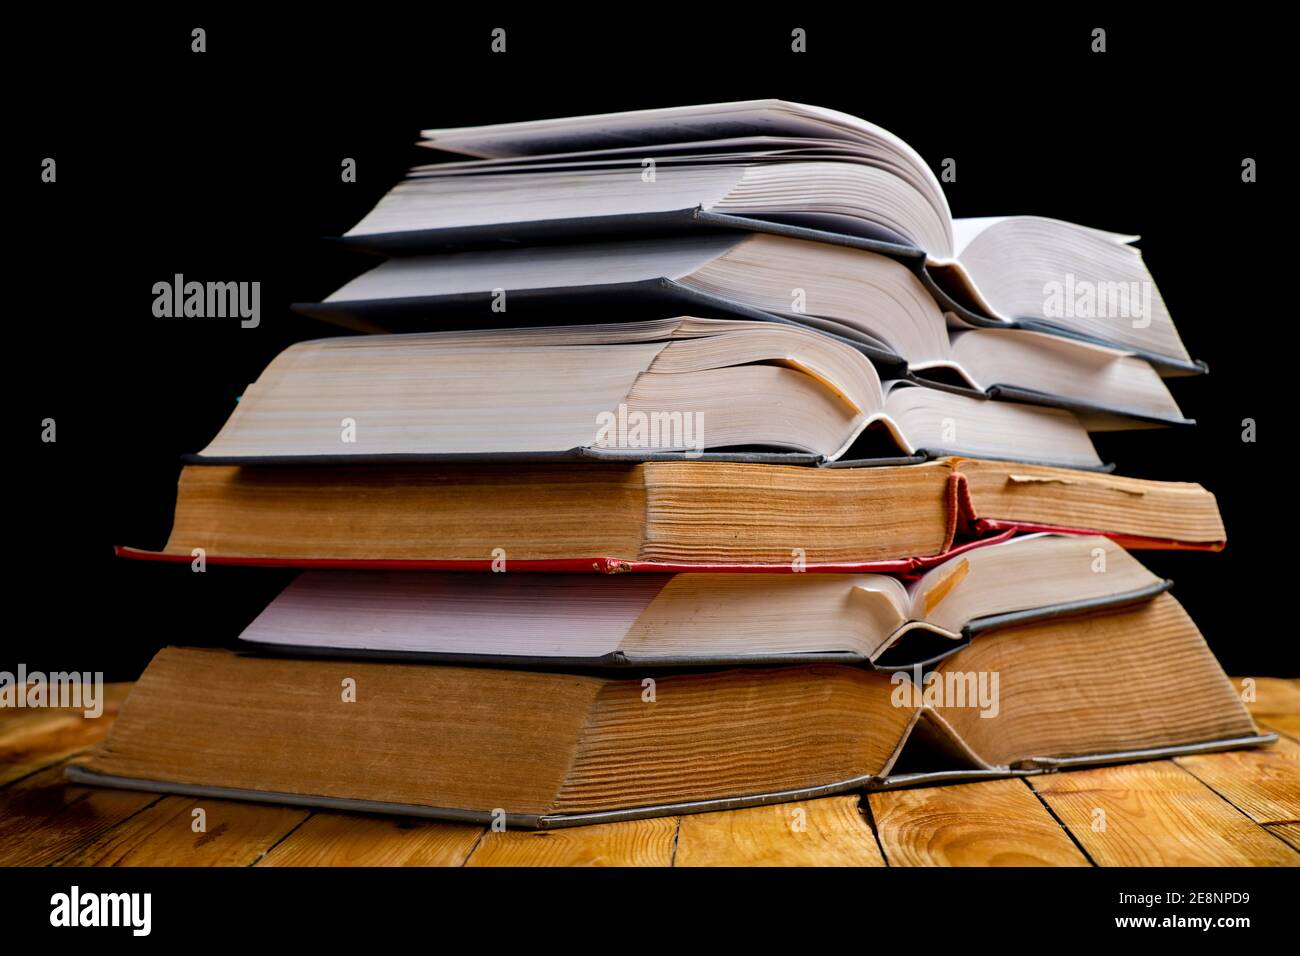 Pile of open books. A large amount of information contained in books. Dark background. Stock Photo